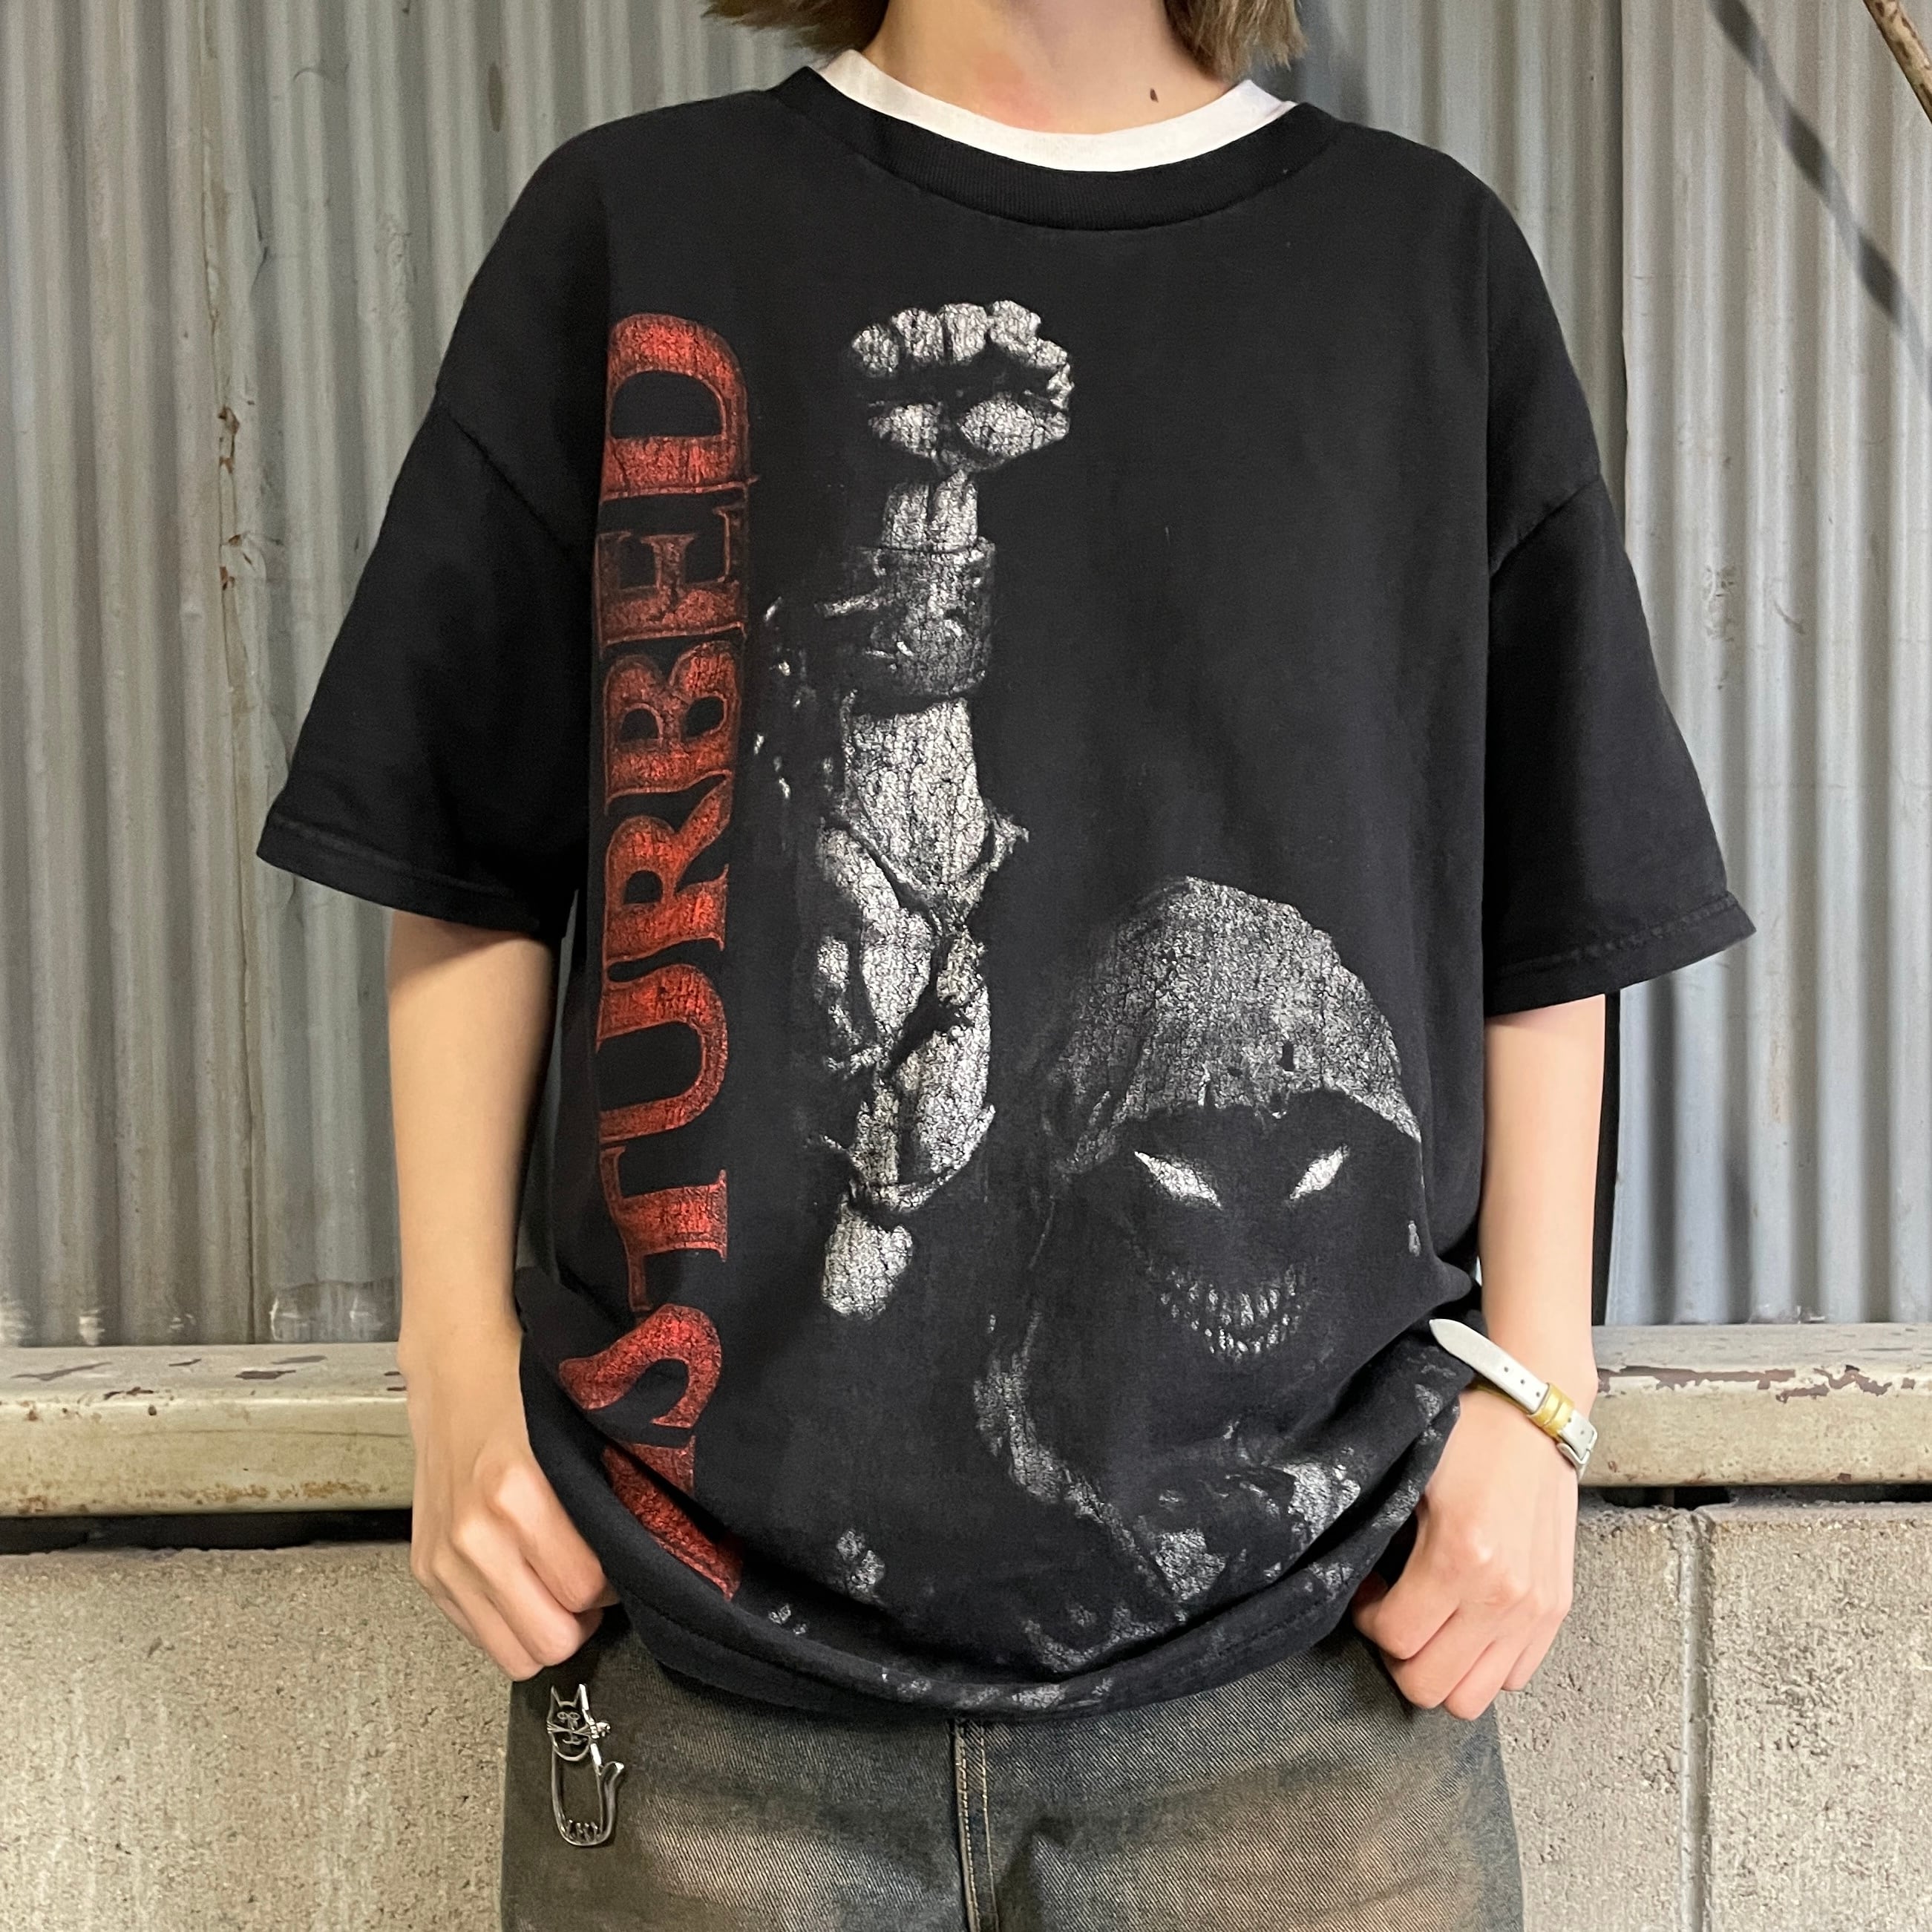 DISTURBED ヘヴィメタル バンドTシャツ プリントTシャツ メンズL相当 古着 ブラック  黒【Tシャツ】【AN20】【PS2307T】【SS2308-3】 | cave 古着屋【公式】古着通販サイト powered by BASE